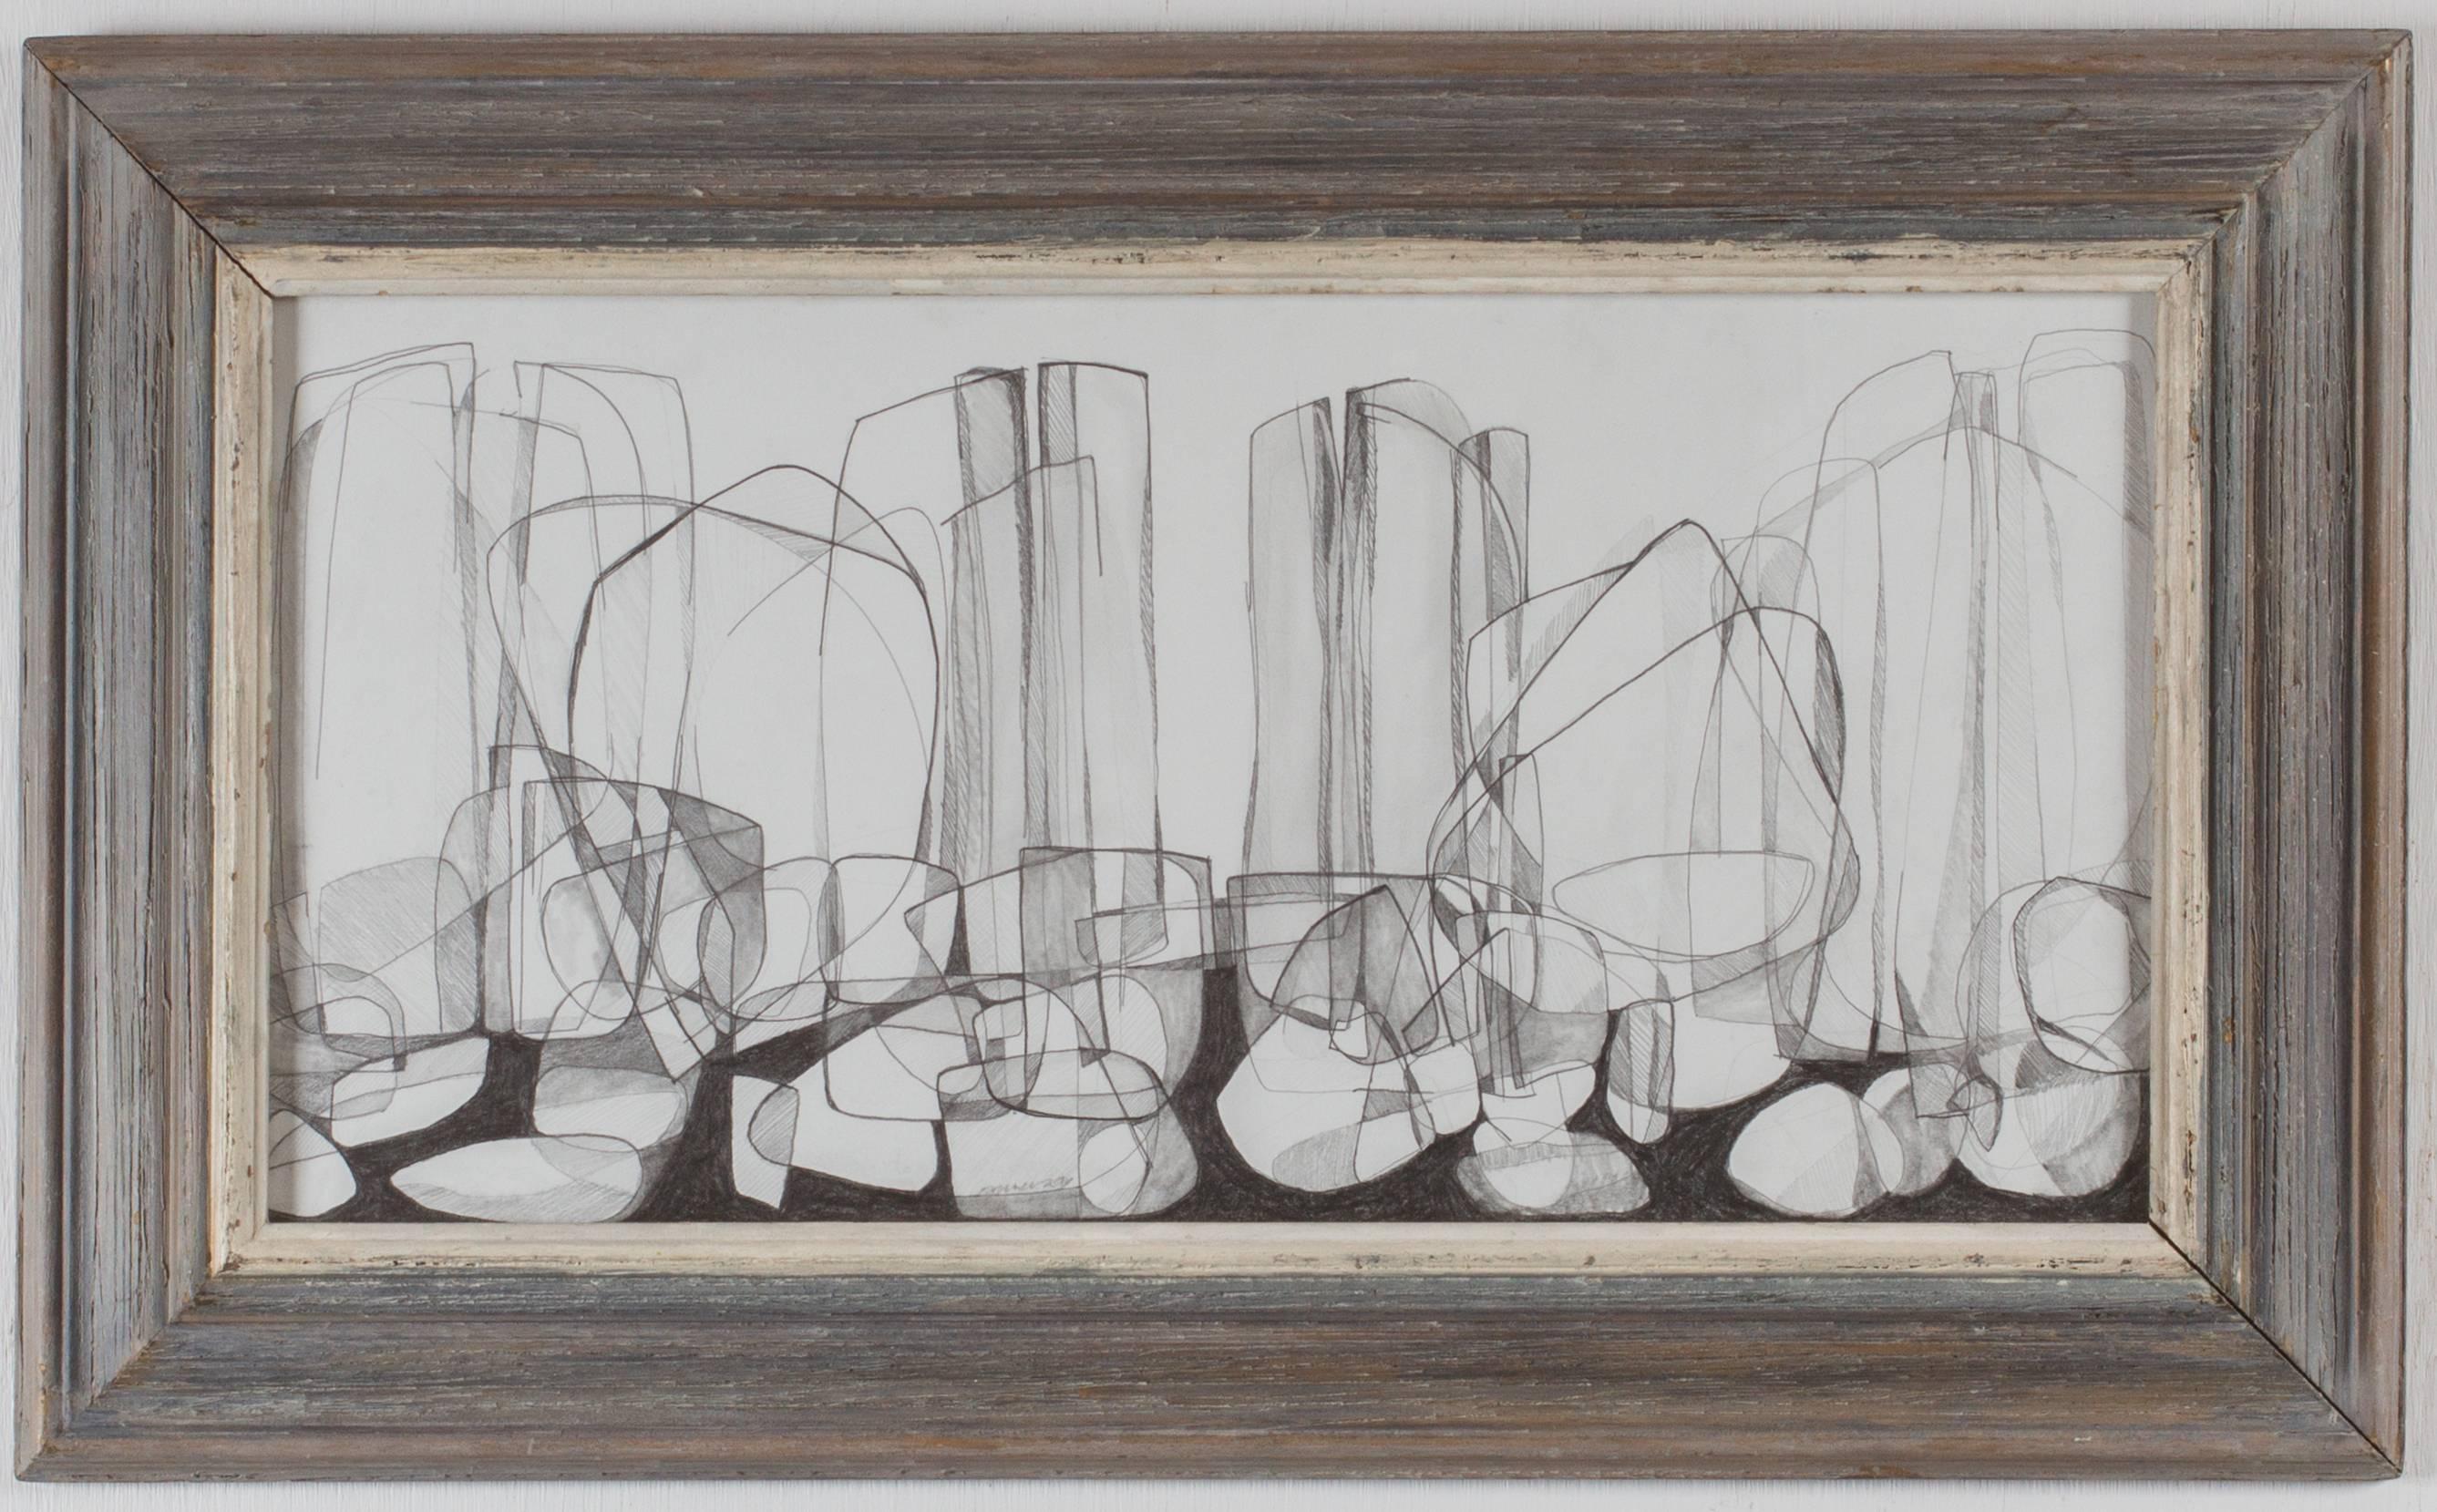 Corinth Canal II (Abstract, Cubist Style Graphite Drawing in Vintage Frame)